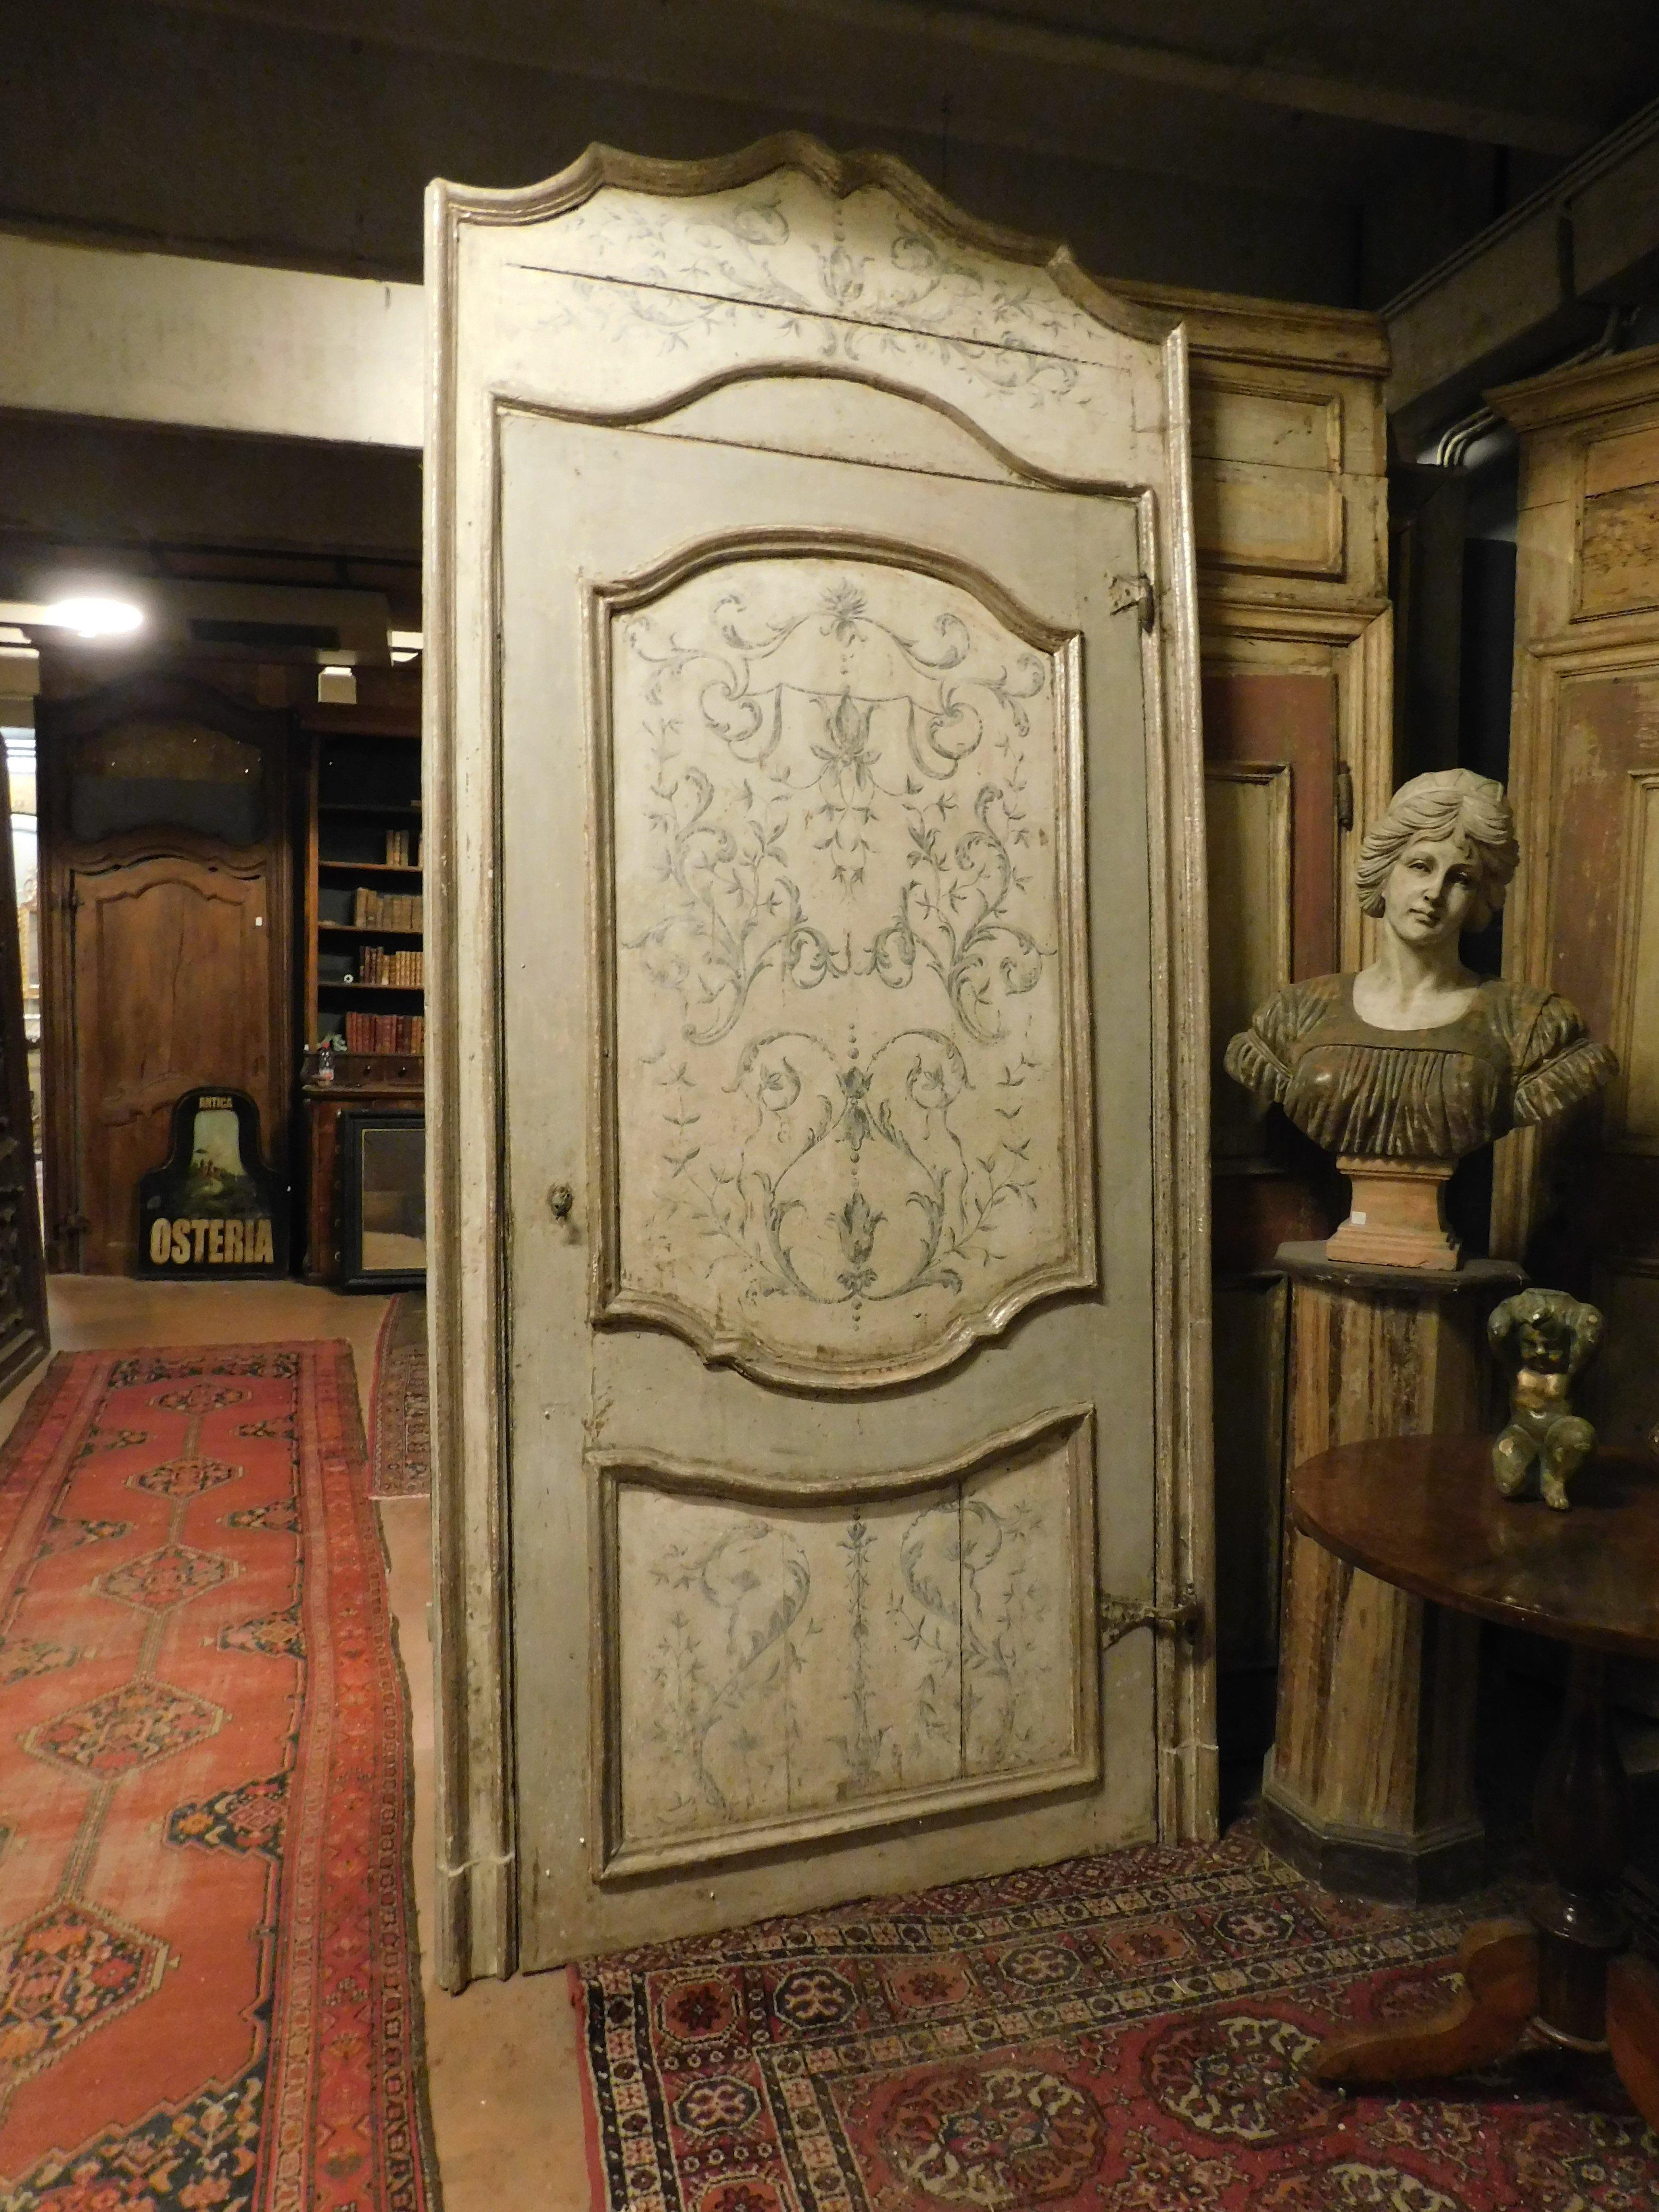 Ancient lacquered and hand-painted door with floral motifs typical of the time, silver-plated on the protruding molars and complete with original wavy frame, built in the 18th century for an important building in Italy.
Very beautiful, of great